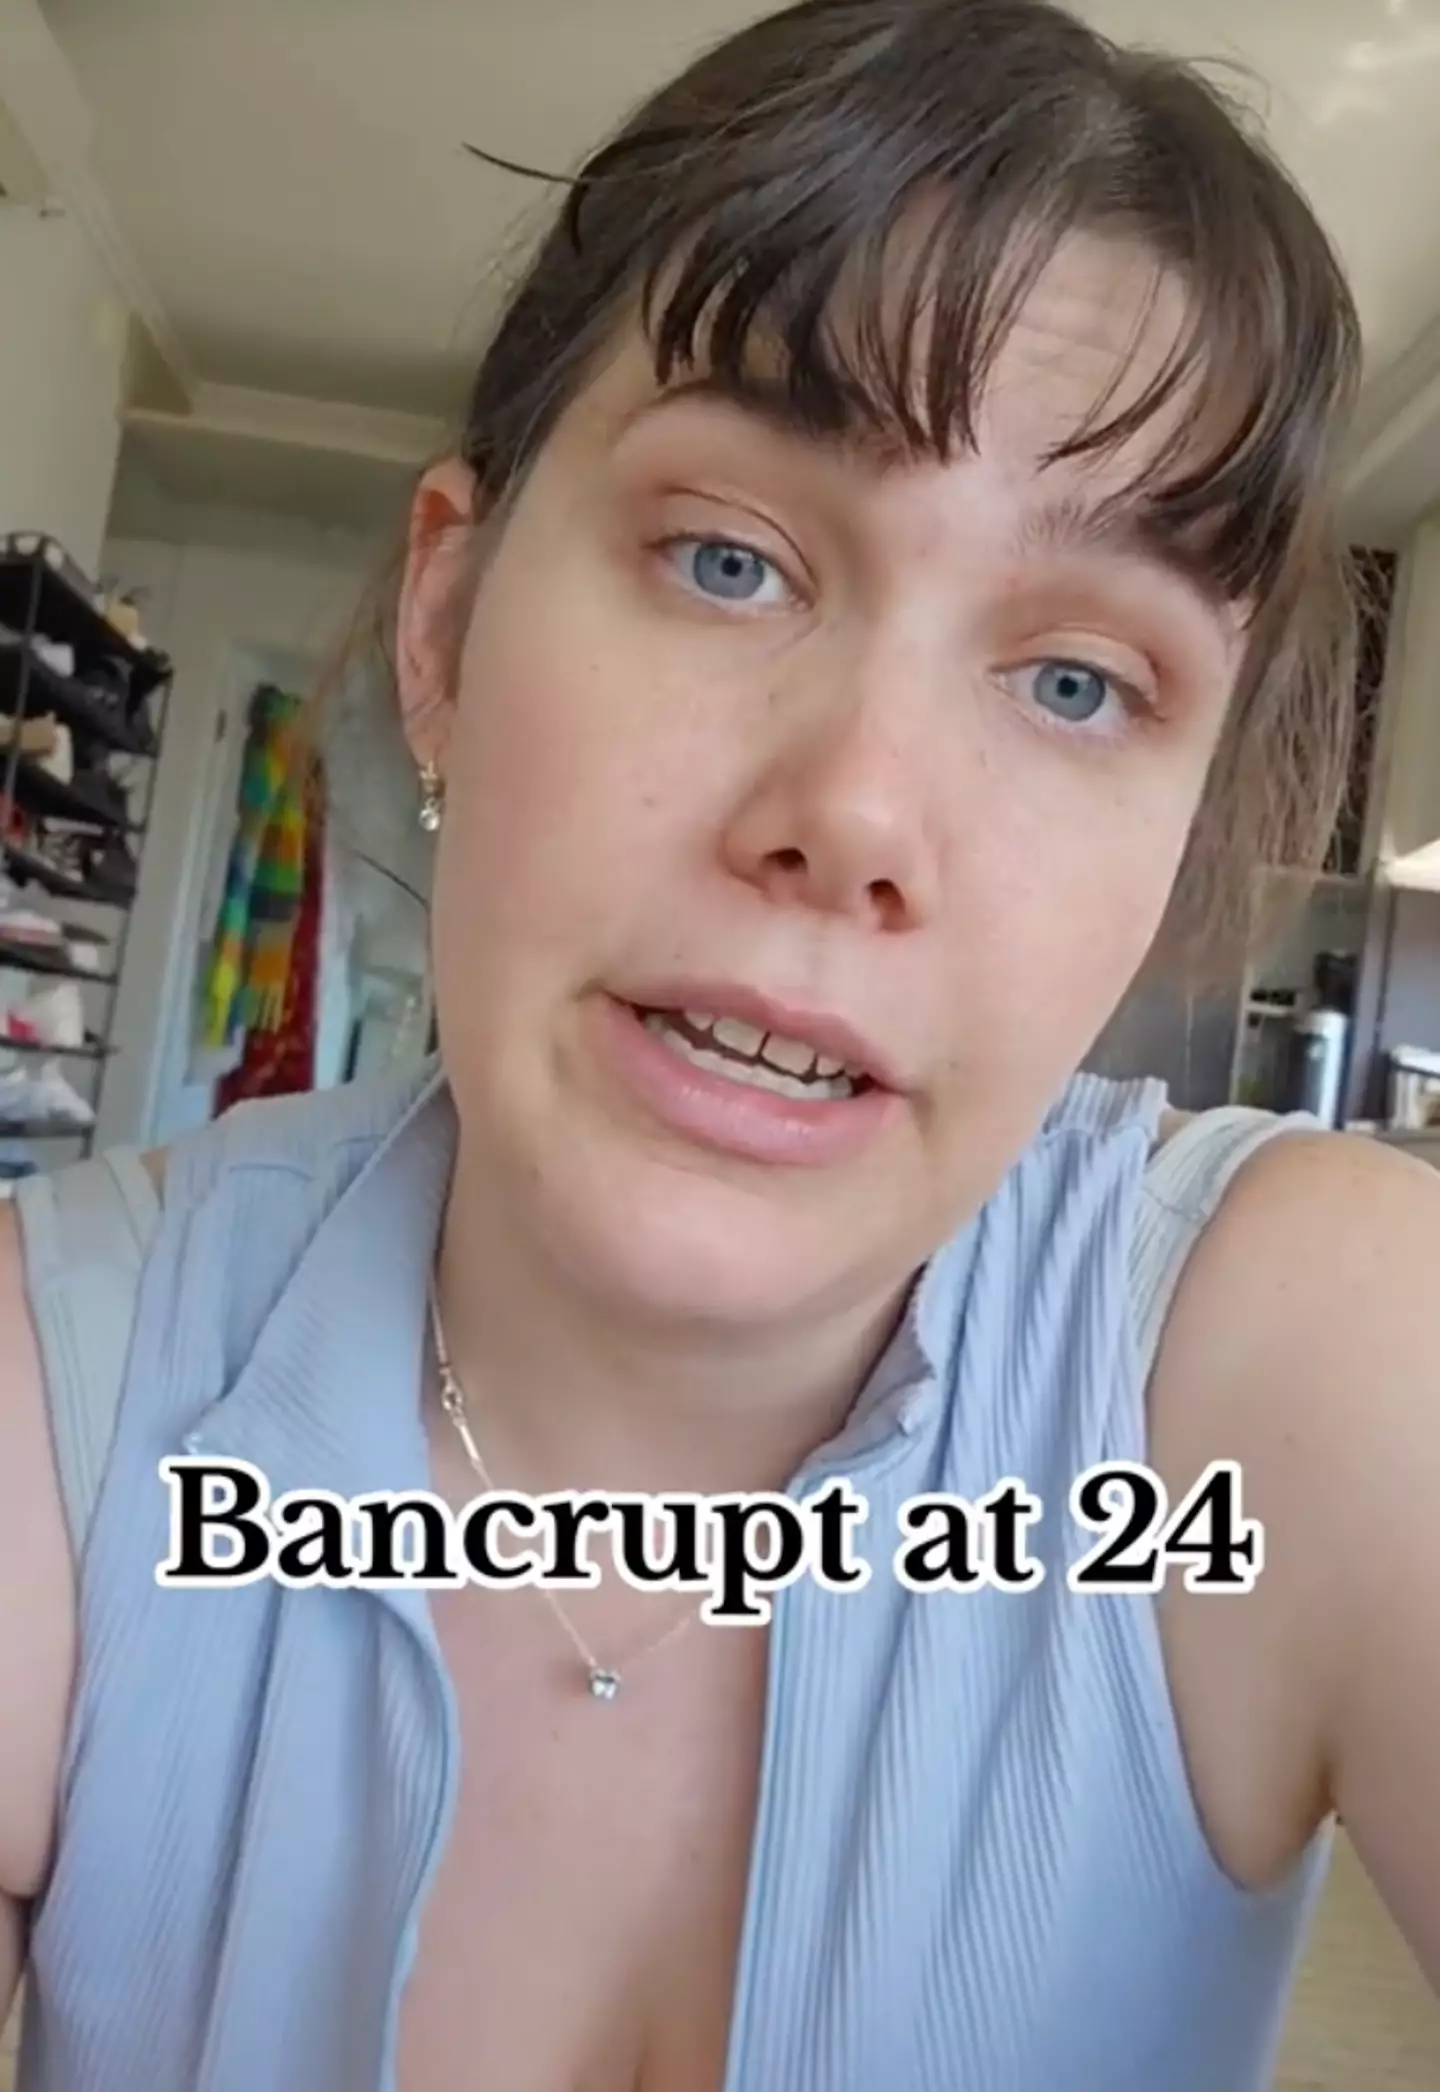 One Aussie woman opened up about how she became bankrupt at 24.